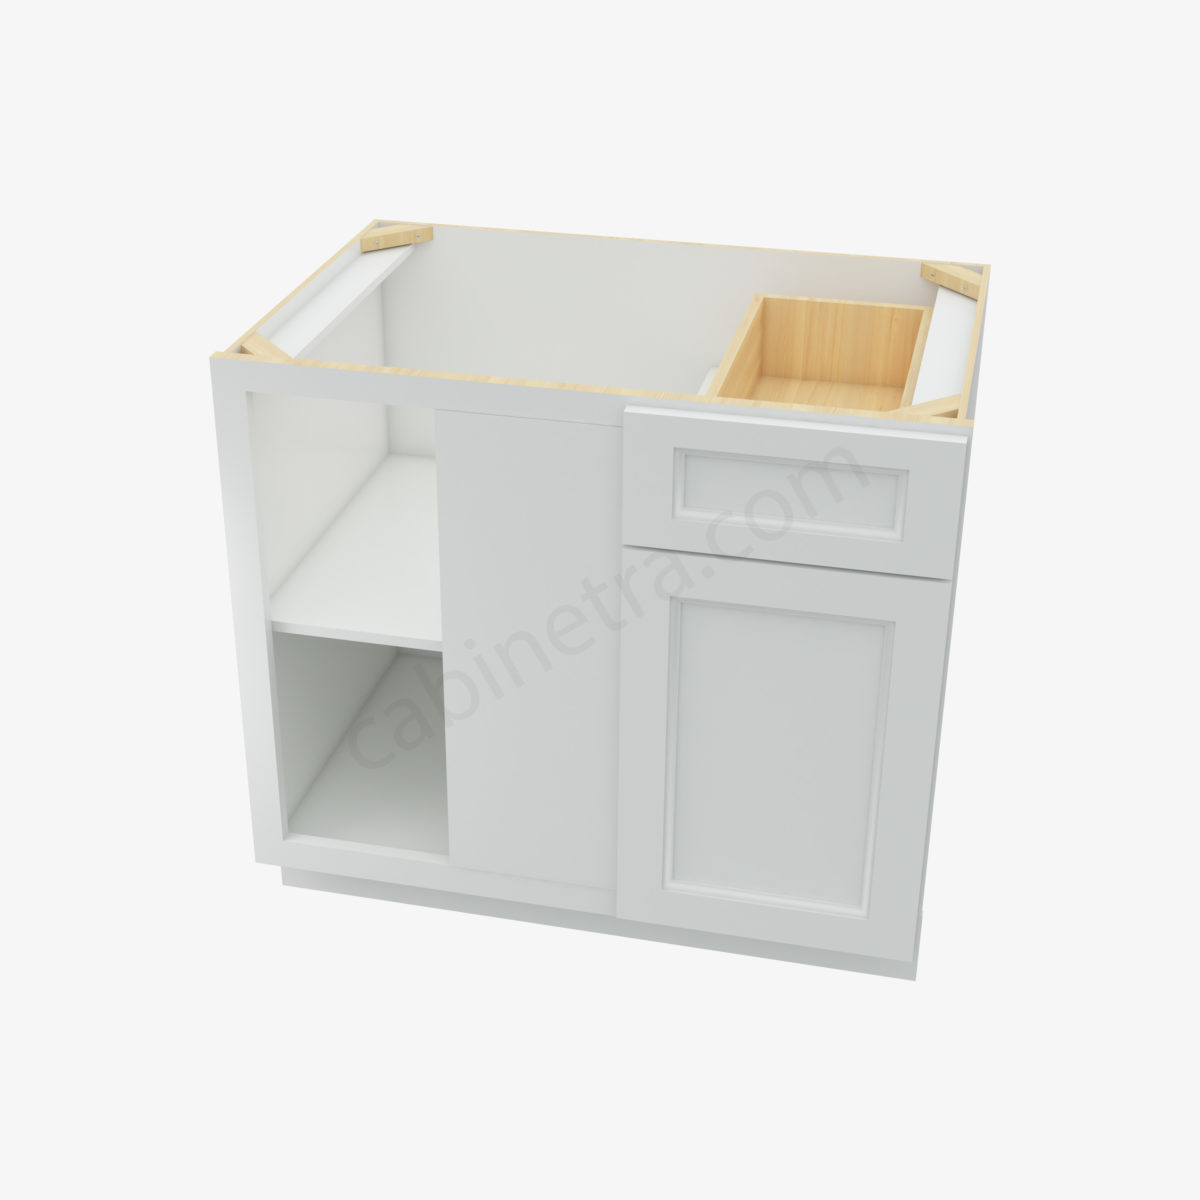 TW BBLC39 42 36W 3 Forevermark Uptown White Cabinetra scaled